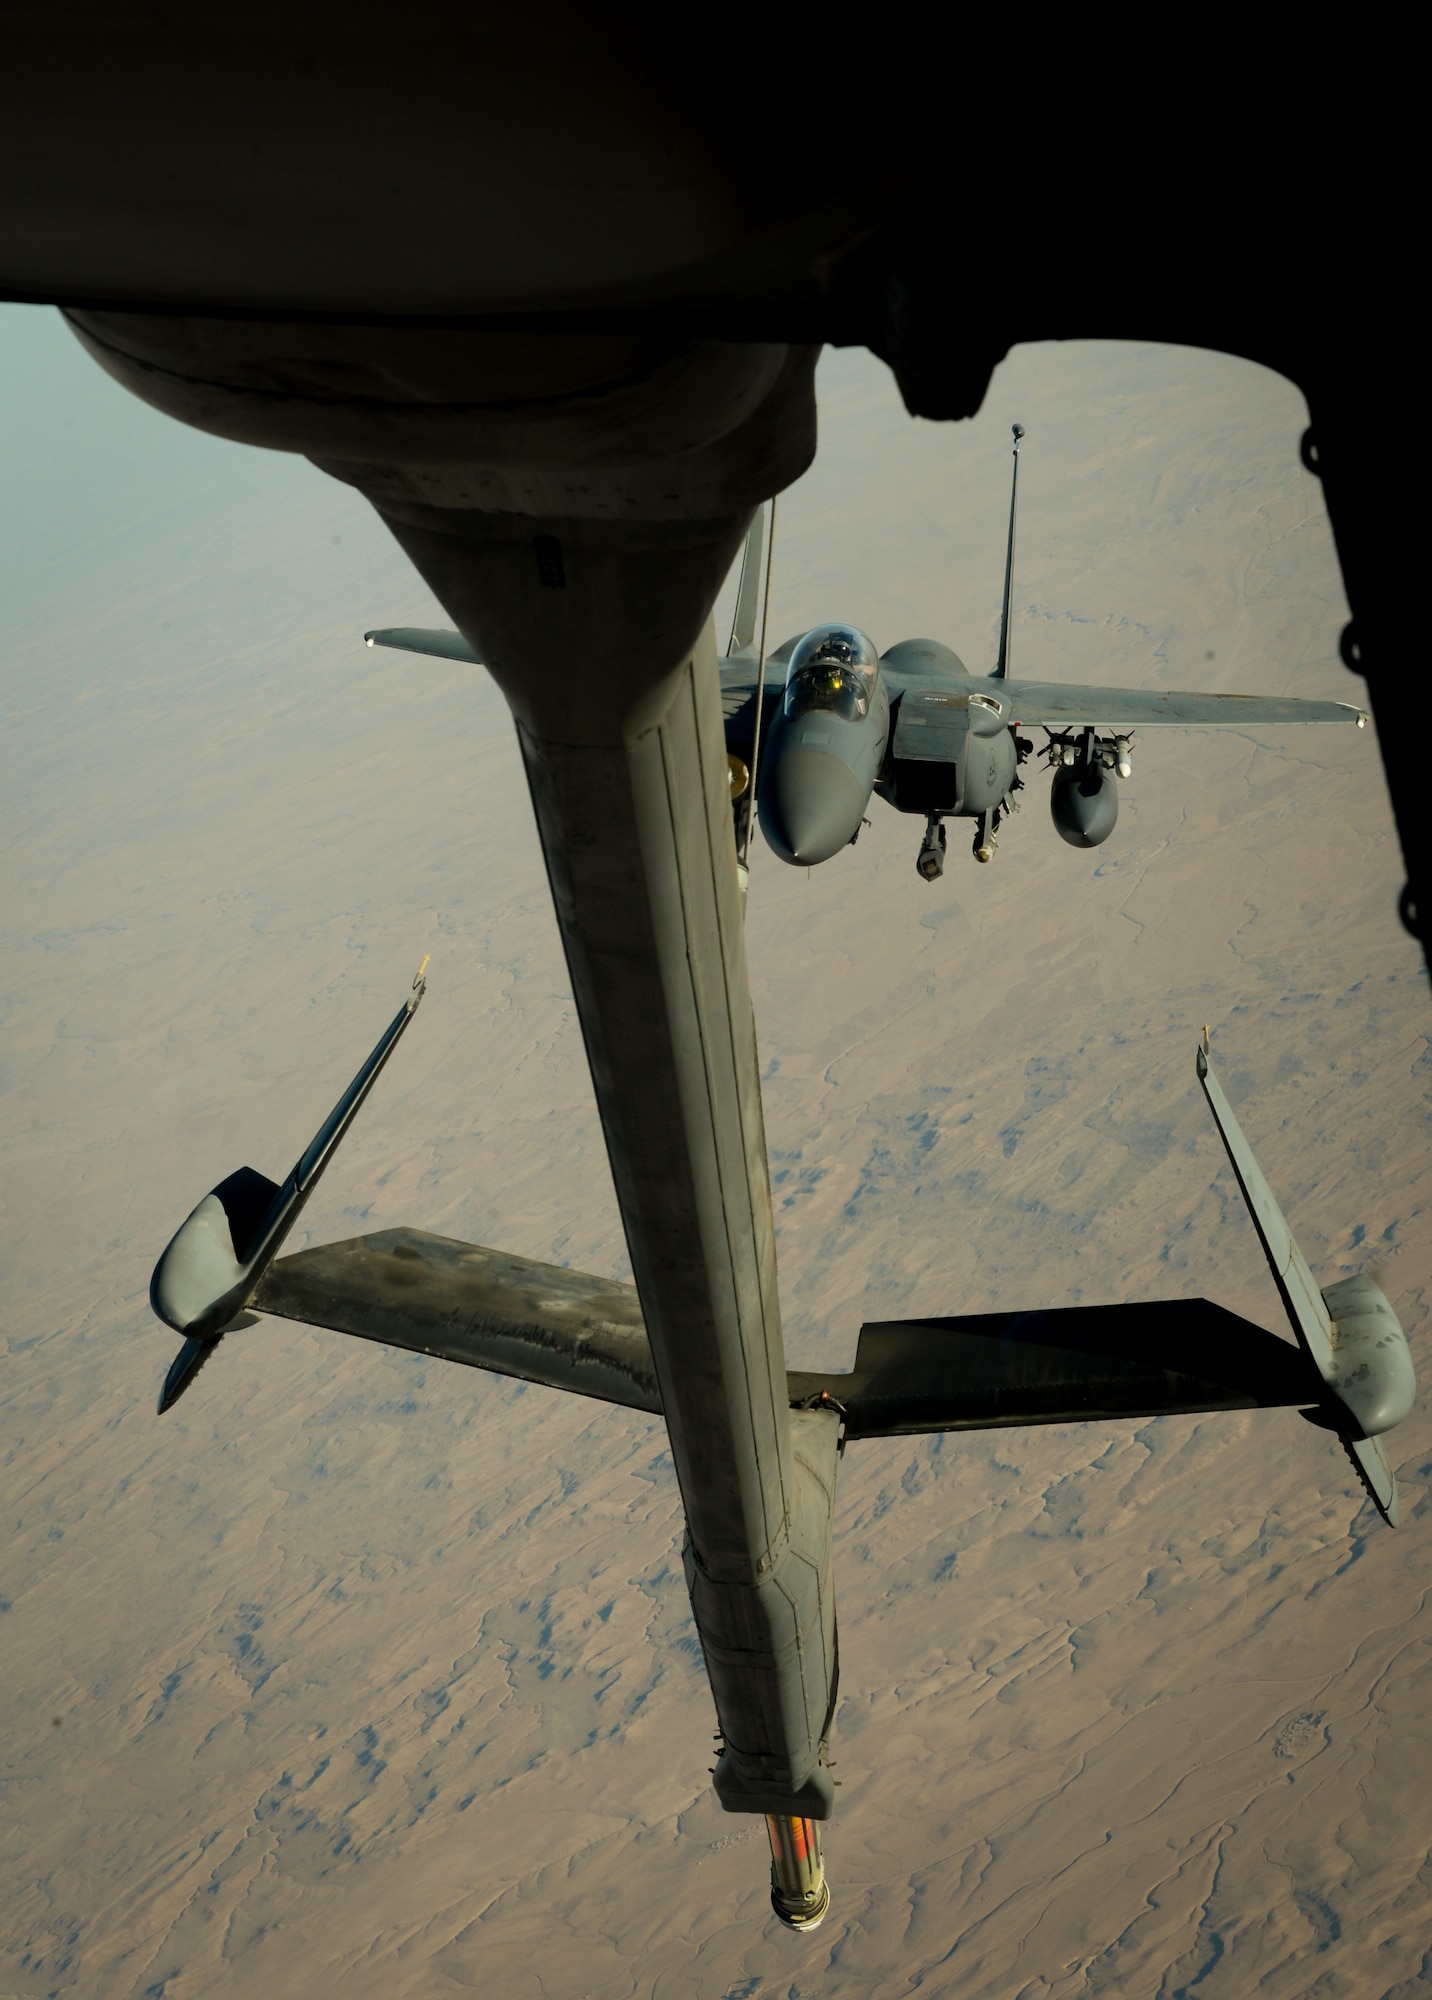 A U.S. Air Force F-15E Strike Eagle prepares to receive fuel from a 908th Expeditionary Air Refueling Squadron KC-10 Extender during a flight in support of Operation Inherent Resolve June 2, 2017. The F-15E Strike Eagle is a dual-role fighter designed to perform air-to-air and air-to-ground missions. An array of avionics and electronics systems gives the F-15E the capability to fight at low altitude, day or night, and in all weather. (U.S. Air Force photo by Staff Sgt. Michael Battles)